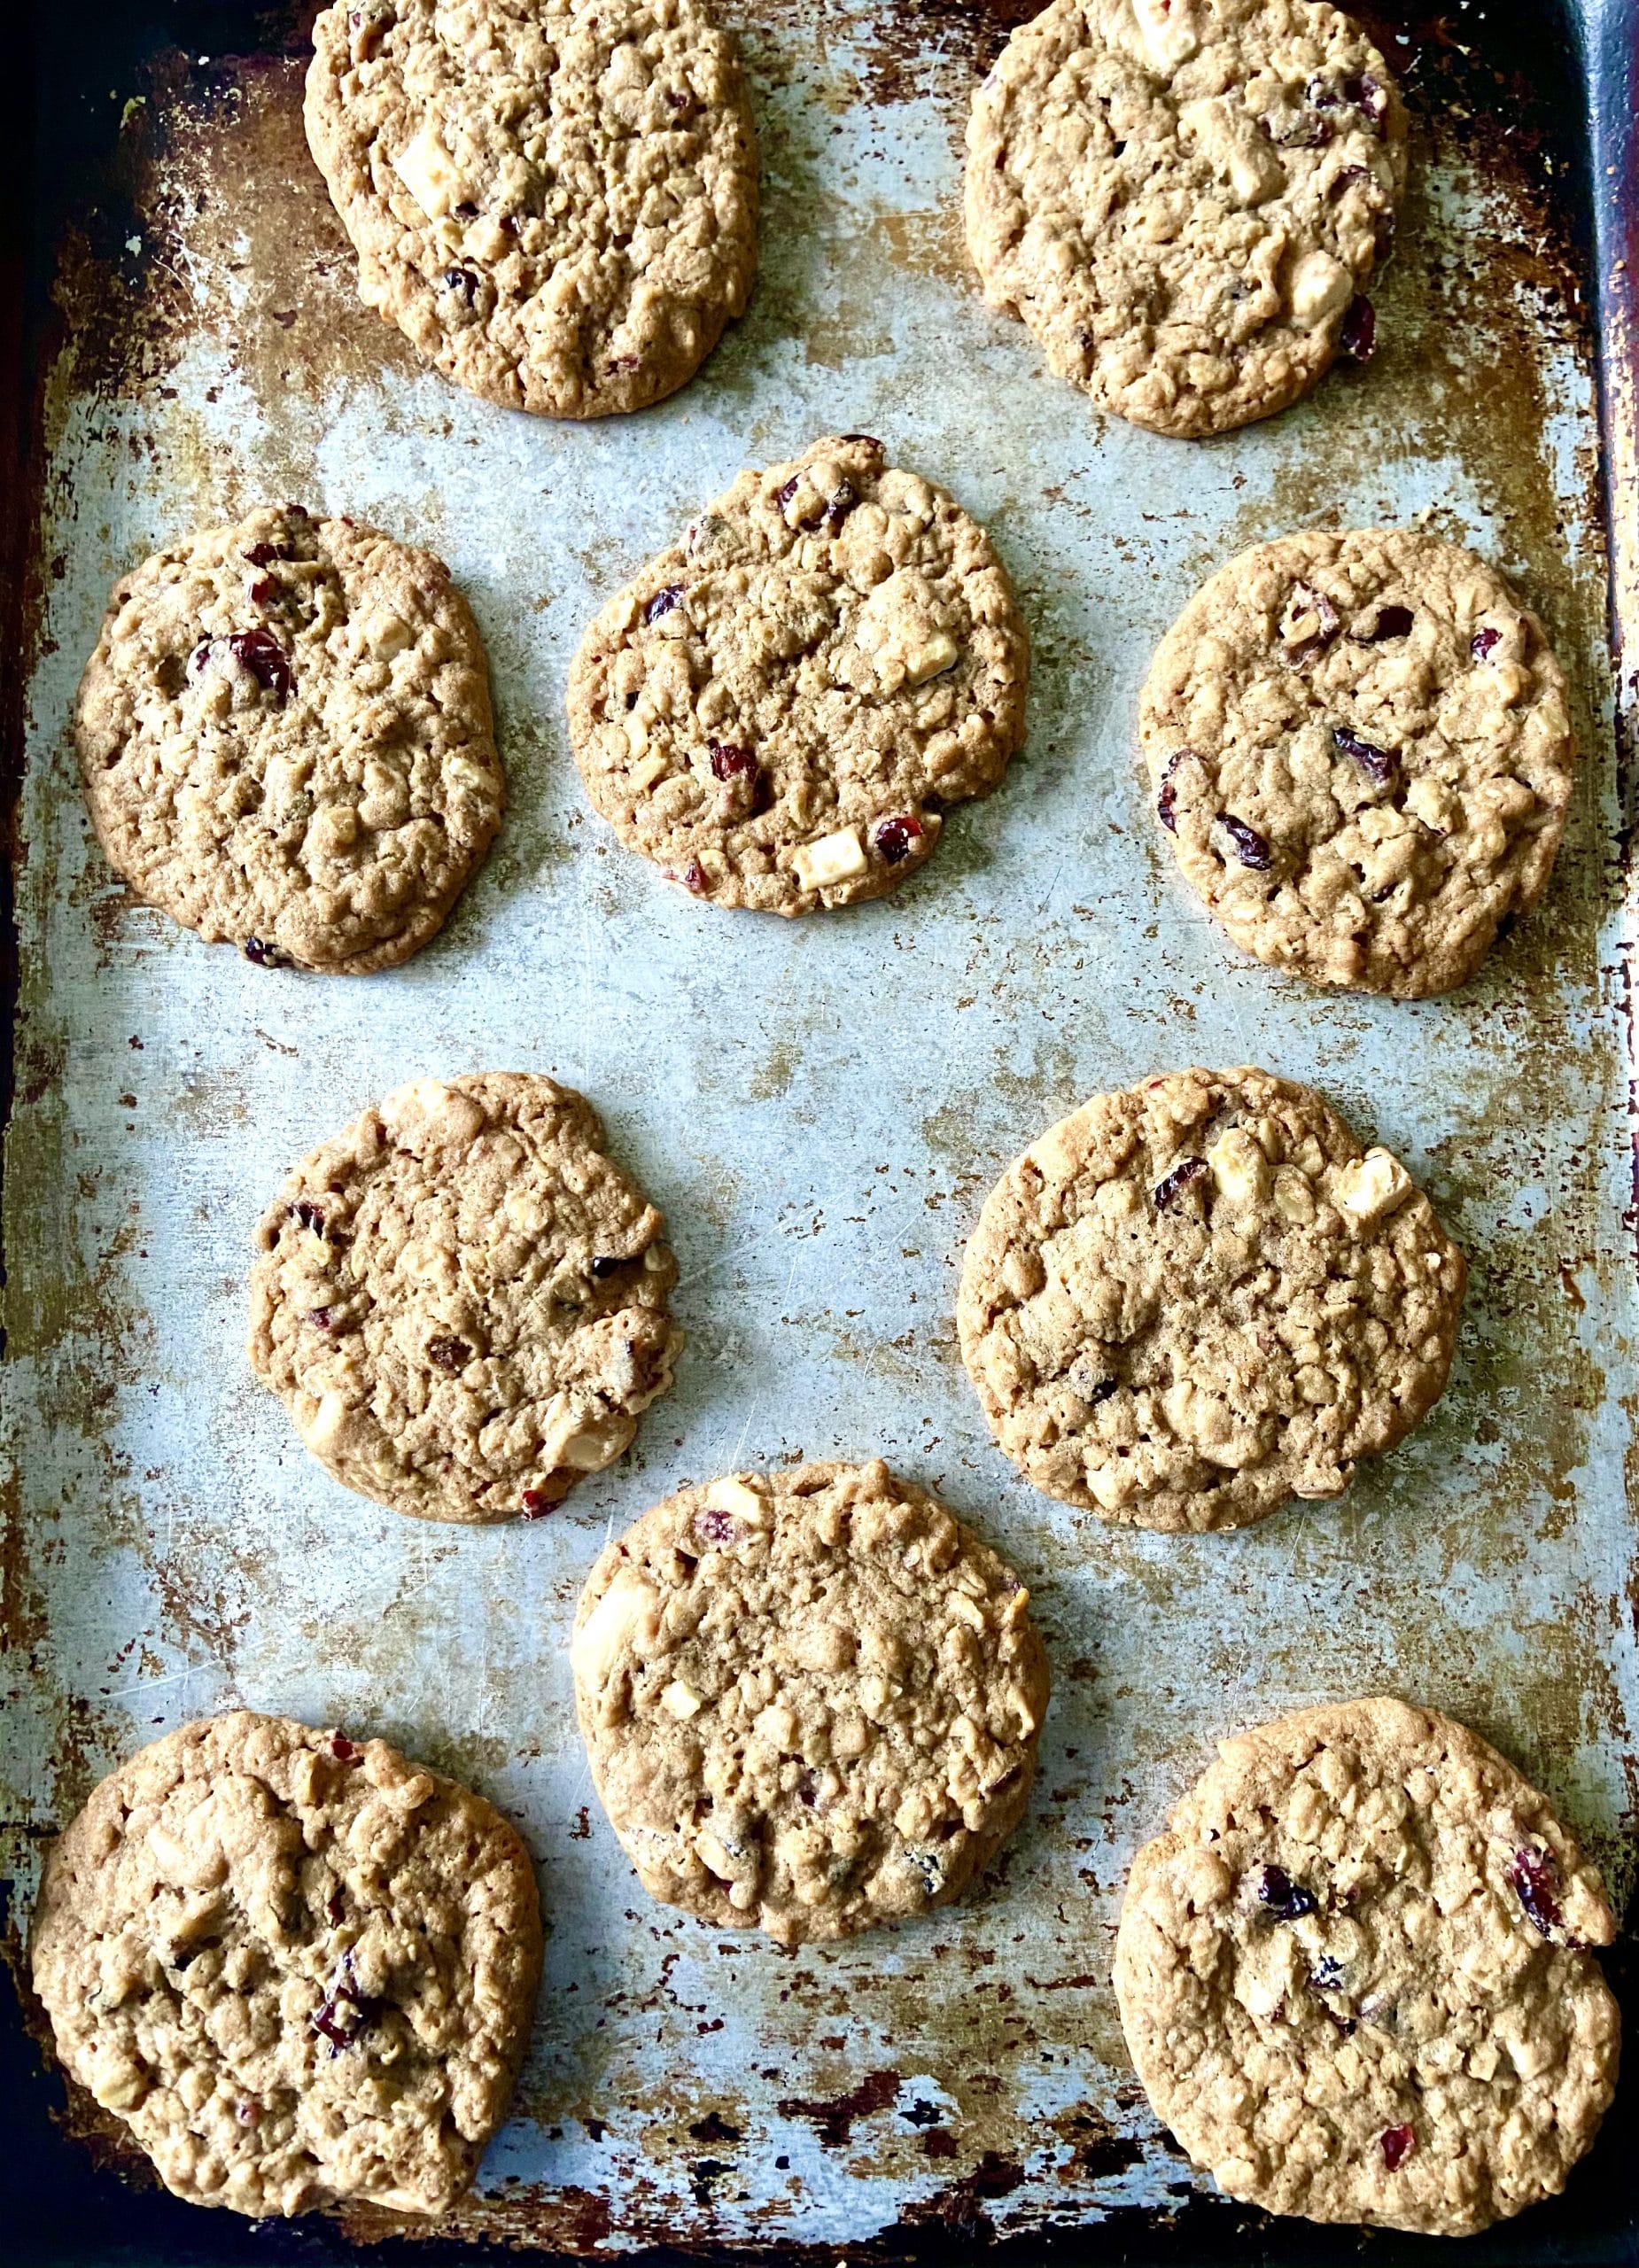 Chewy, lightly sweet and simple to make, these Cranberry White Chocolate Macadamia Nut Cookies will soon become a family favorite!